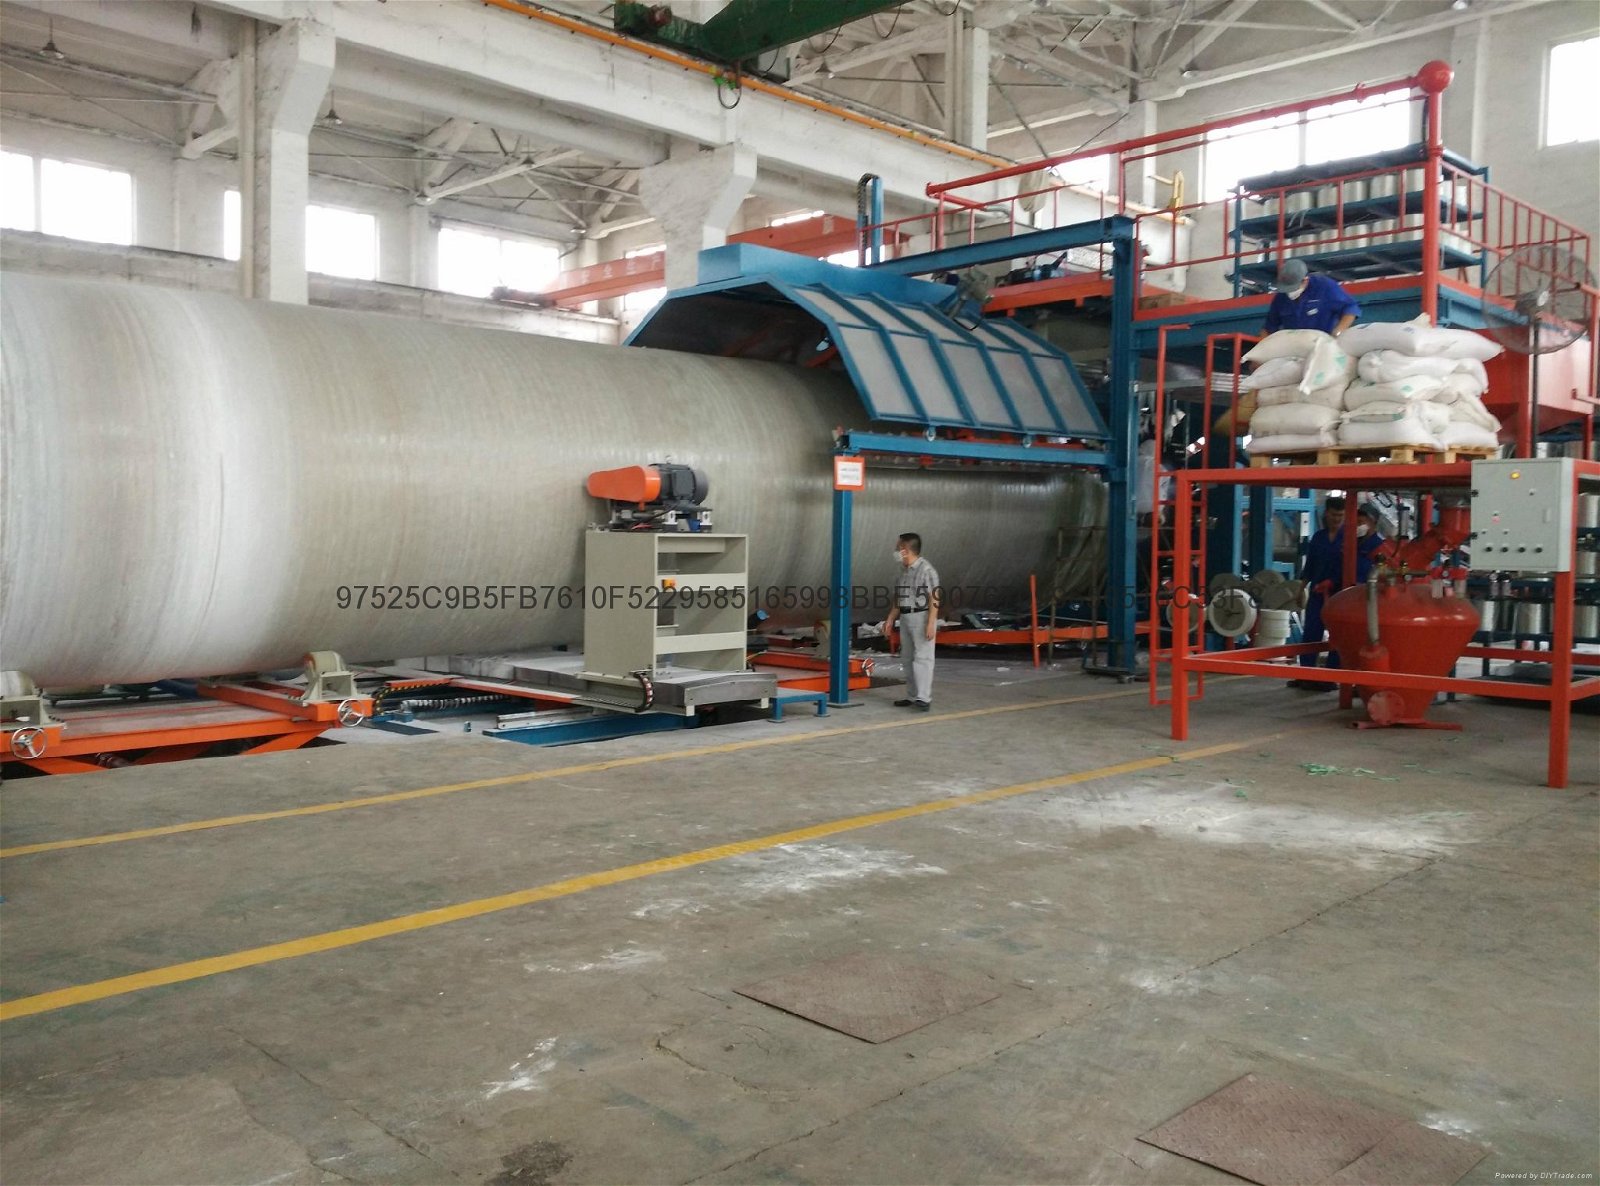 Brief introduction of GRP filament continuous winding line 4